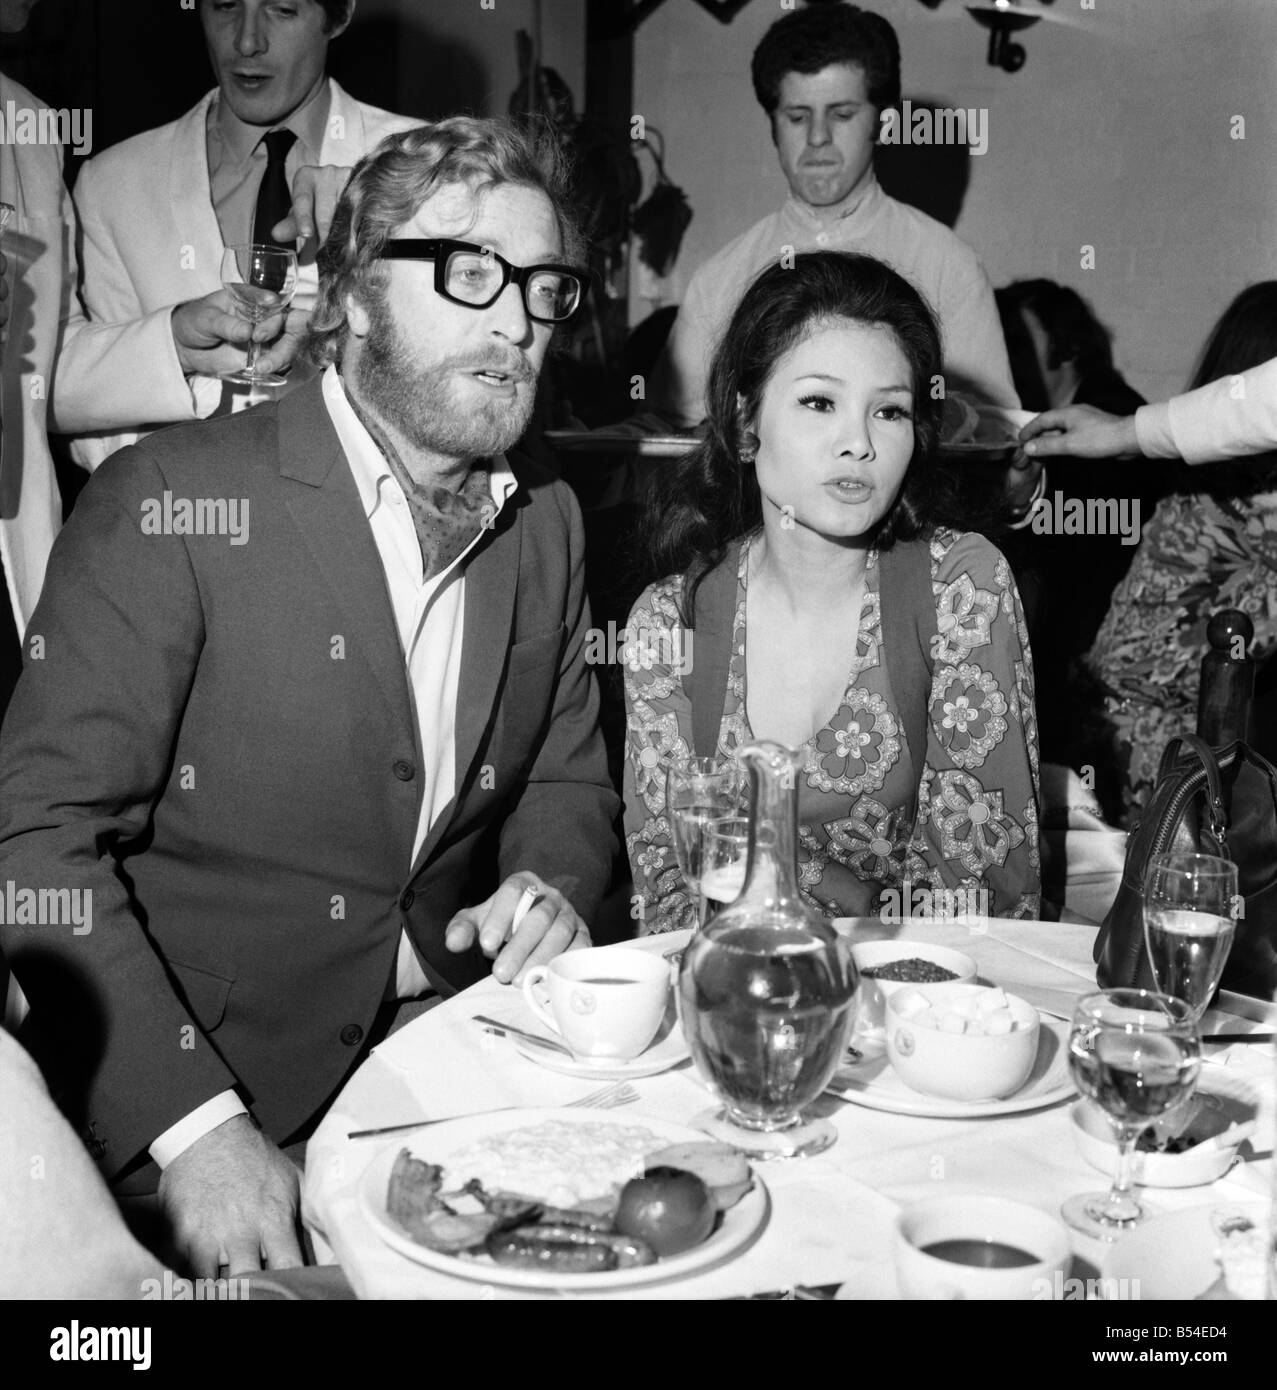 Photographer David Bailey today held a party in a Kings Road chelsea club to launch his book attended the party. Michael Caine with his girl friend Minda Feliciano. November 1969 Z10810-004 Stock Photo